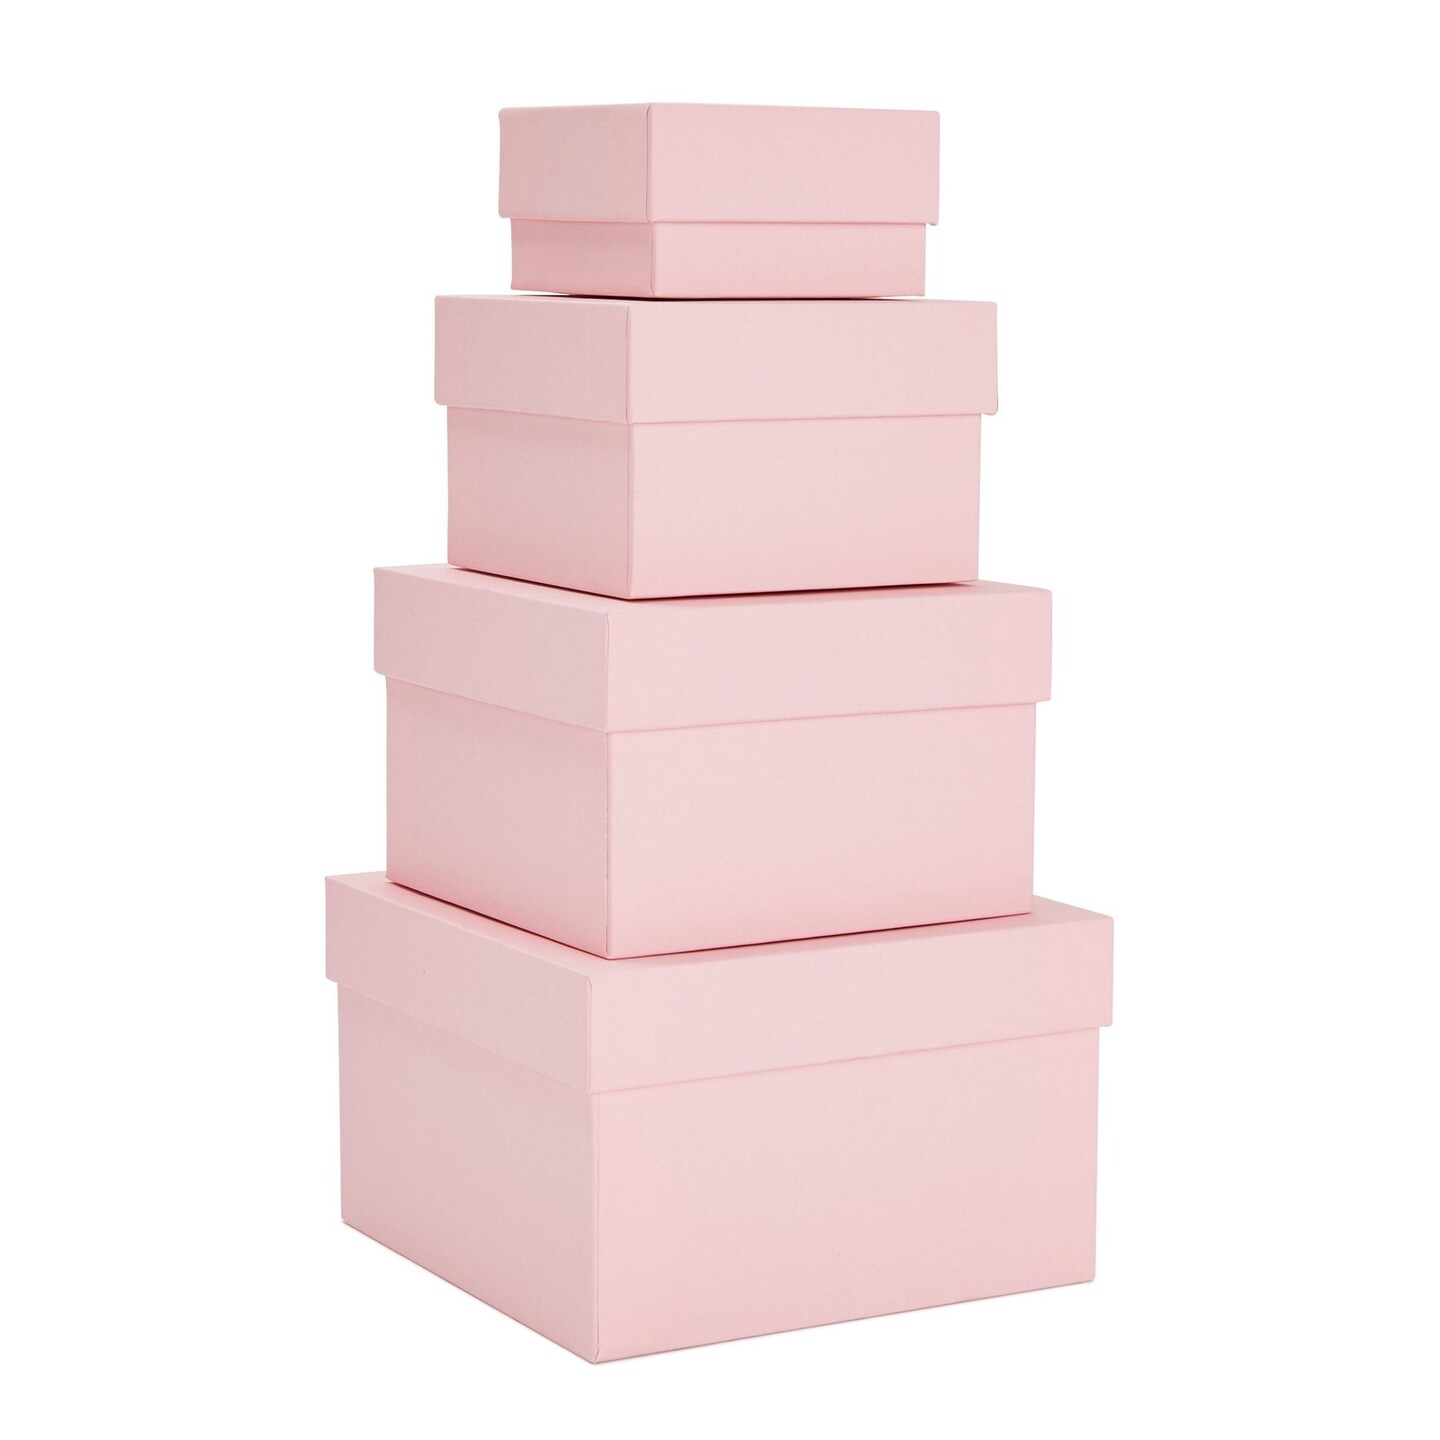 Briful Square Gift Boxes with Lids Set of 4 Pink Gift Box Assorted Sizes Nesting Gift Boxes for Presents Birthday Bridesmaid Wedding VA